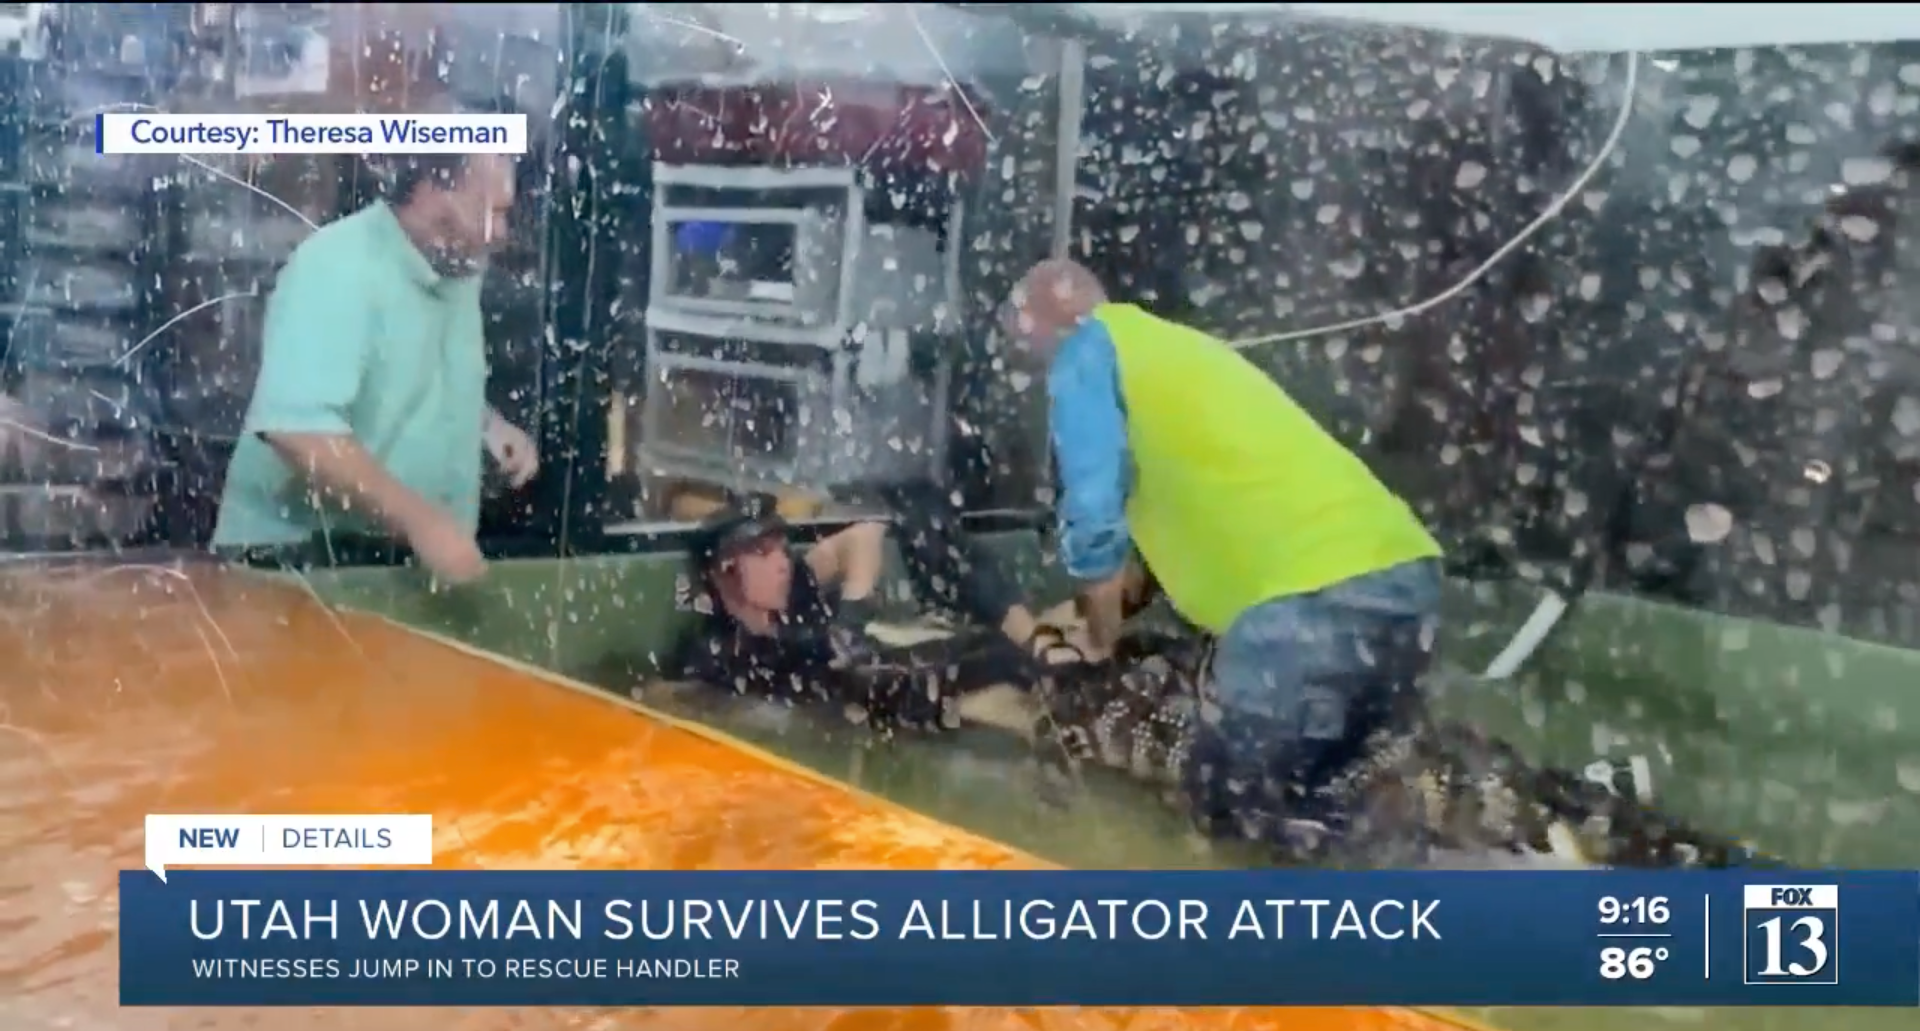 A witness jumps into an alligator tank to help a handler after her hand was bit by the reptile.